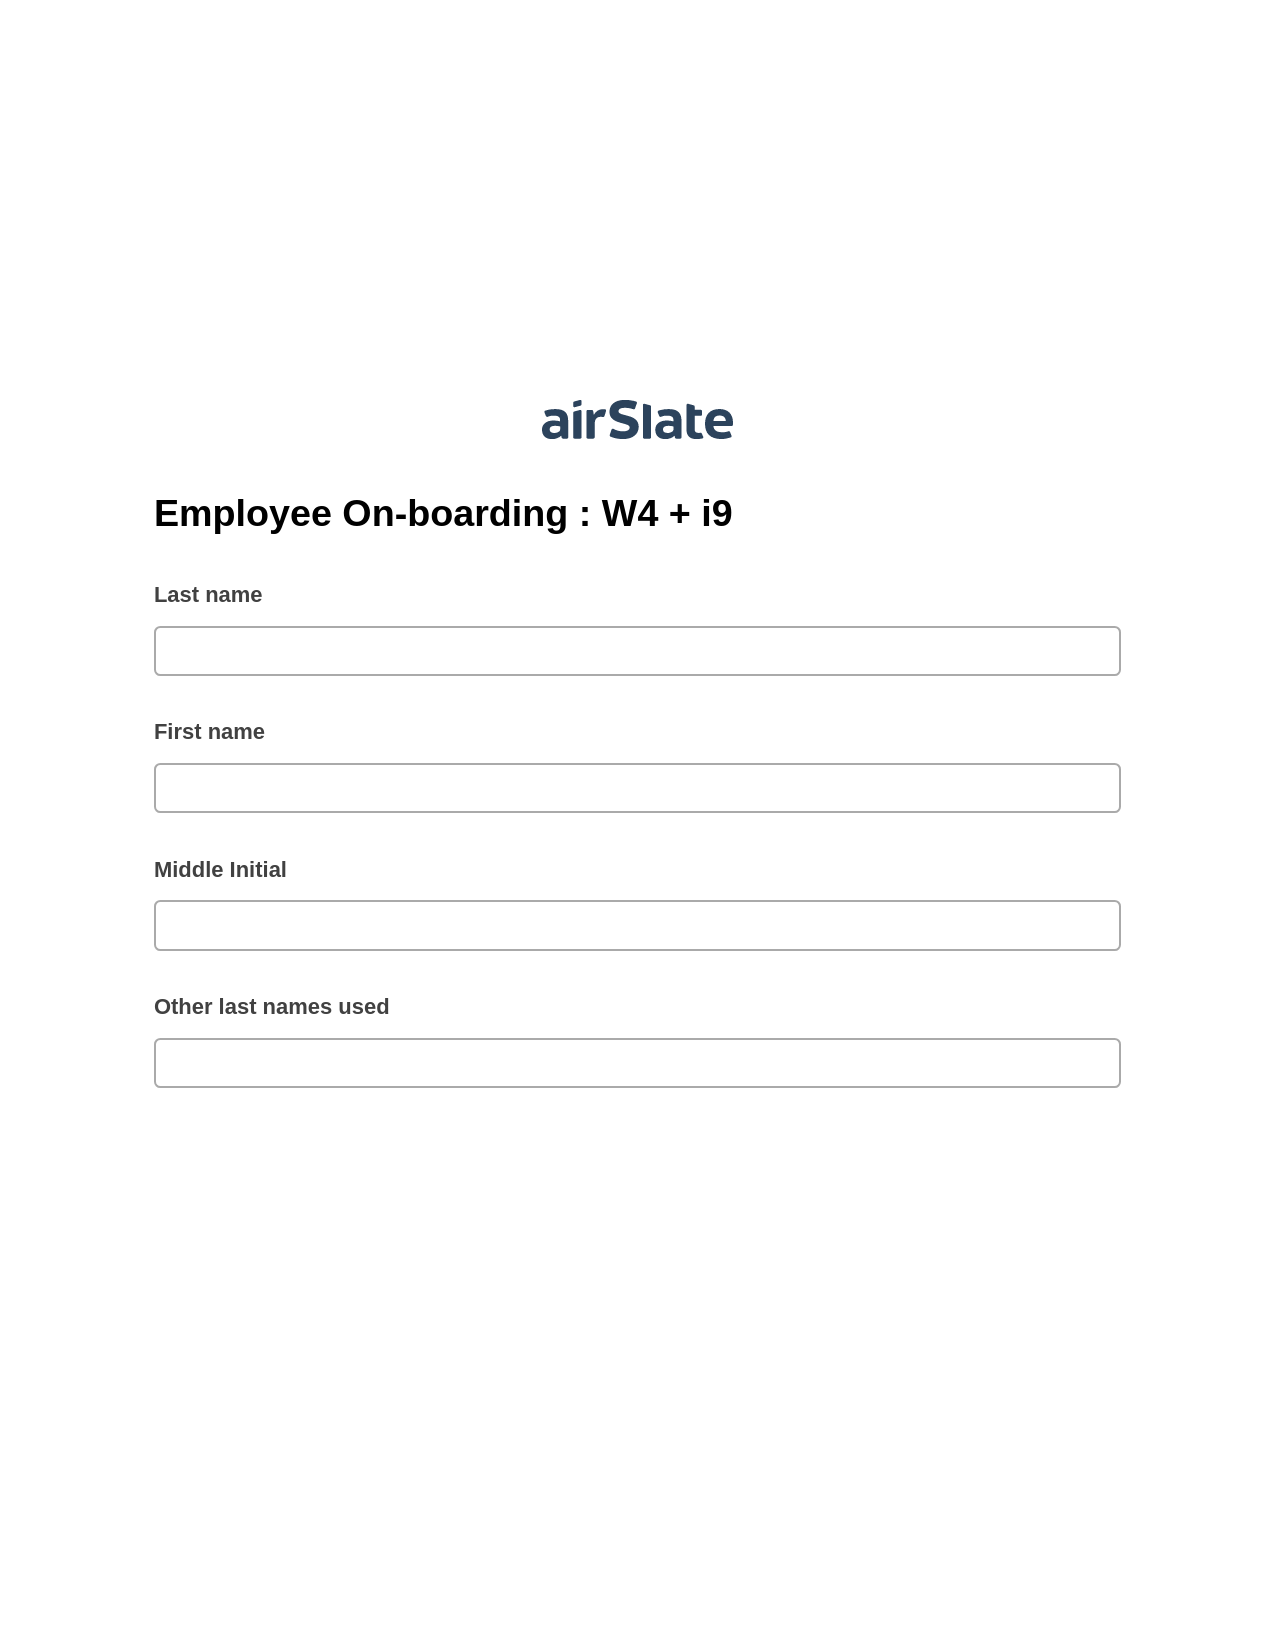 Employee On-boarding : W4 + i9 Pre-fill Dropdowns from Excel Bot, SendGrid Send Campaign Bot, Export to MySQL Bot